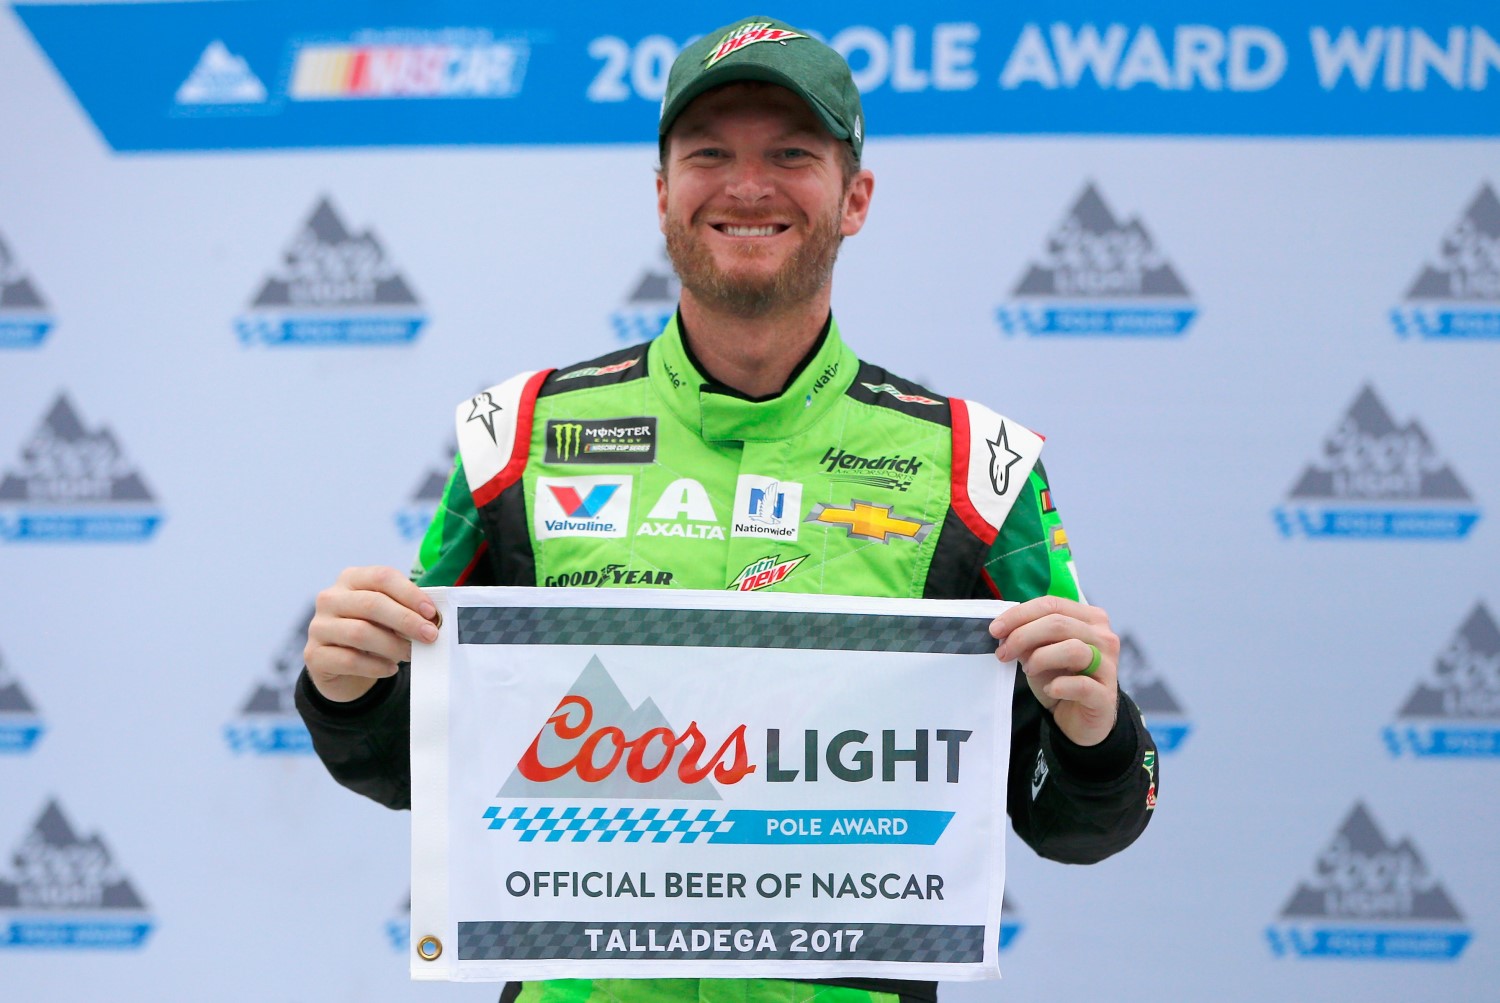 Everything happens in NASCAR for a reason. How big was that restrictor plate NASCAR gave Dale Jr. for his final sentimental run at Talladega? Is it big enough to lead every lap on Sunday?